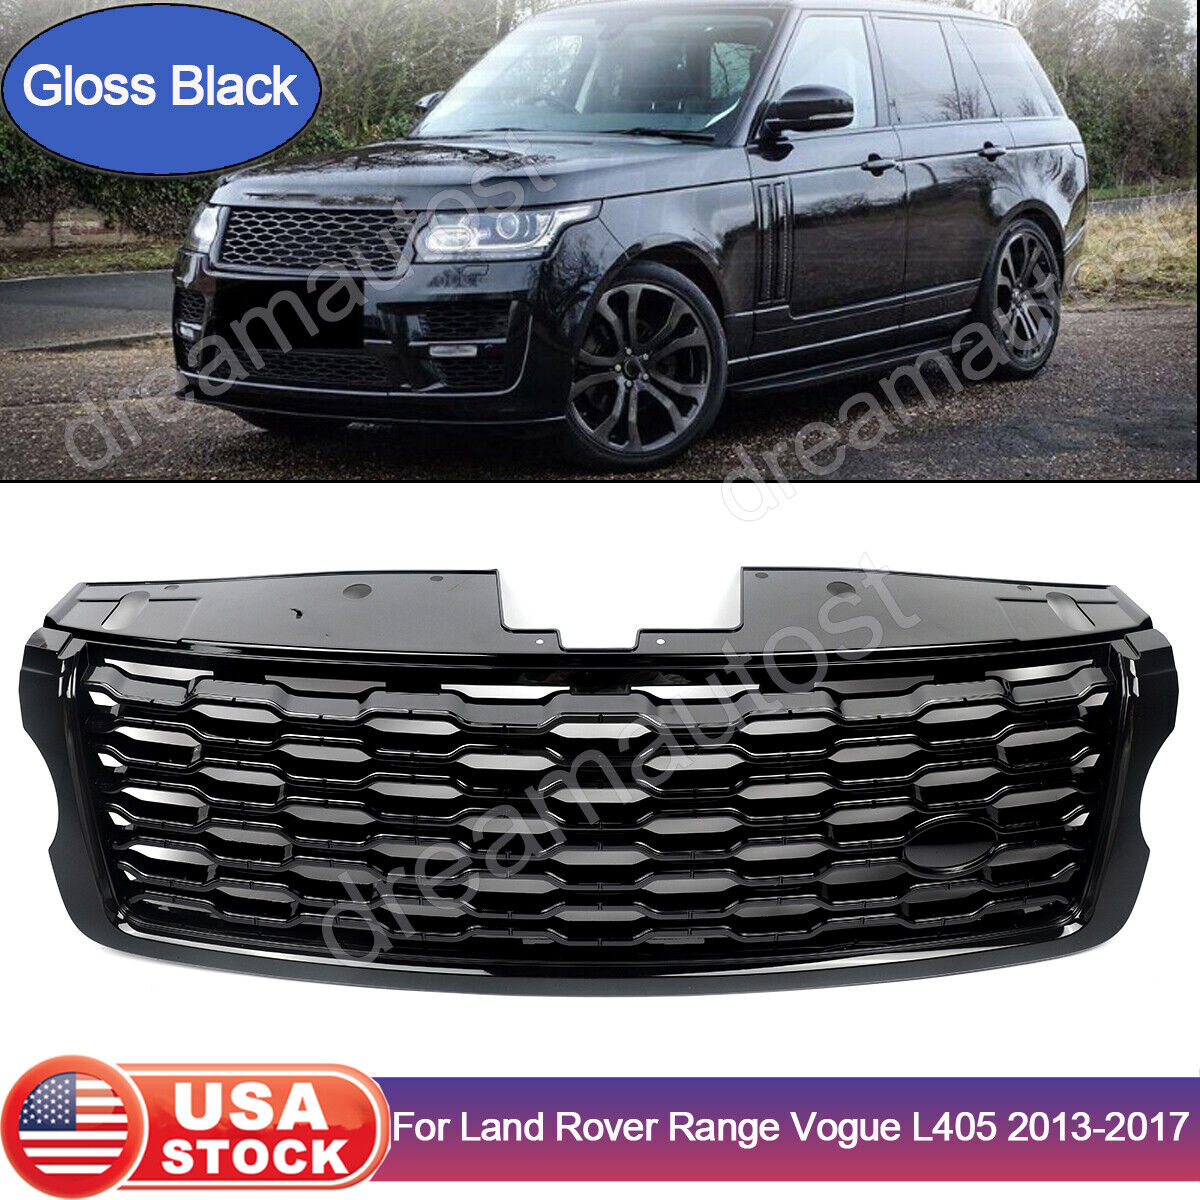 For Range Rover L405 Vogue 2013-17 Front Grille 2018 Facelift Style Gloss Black